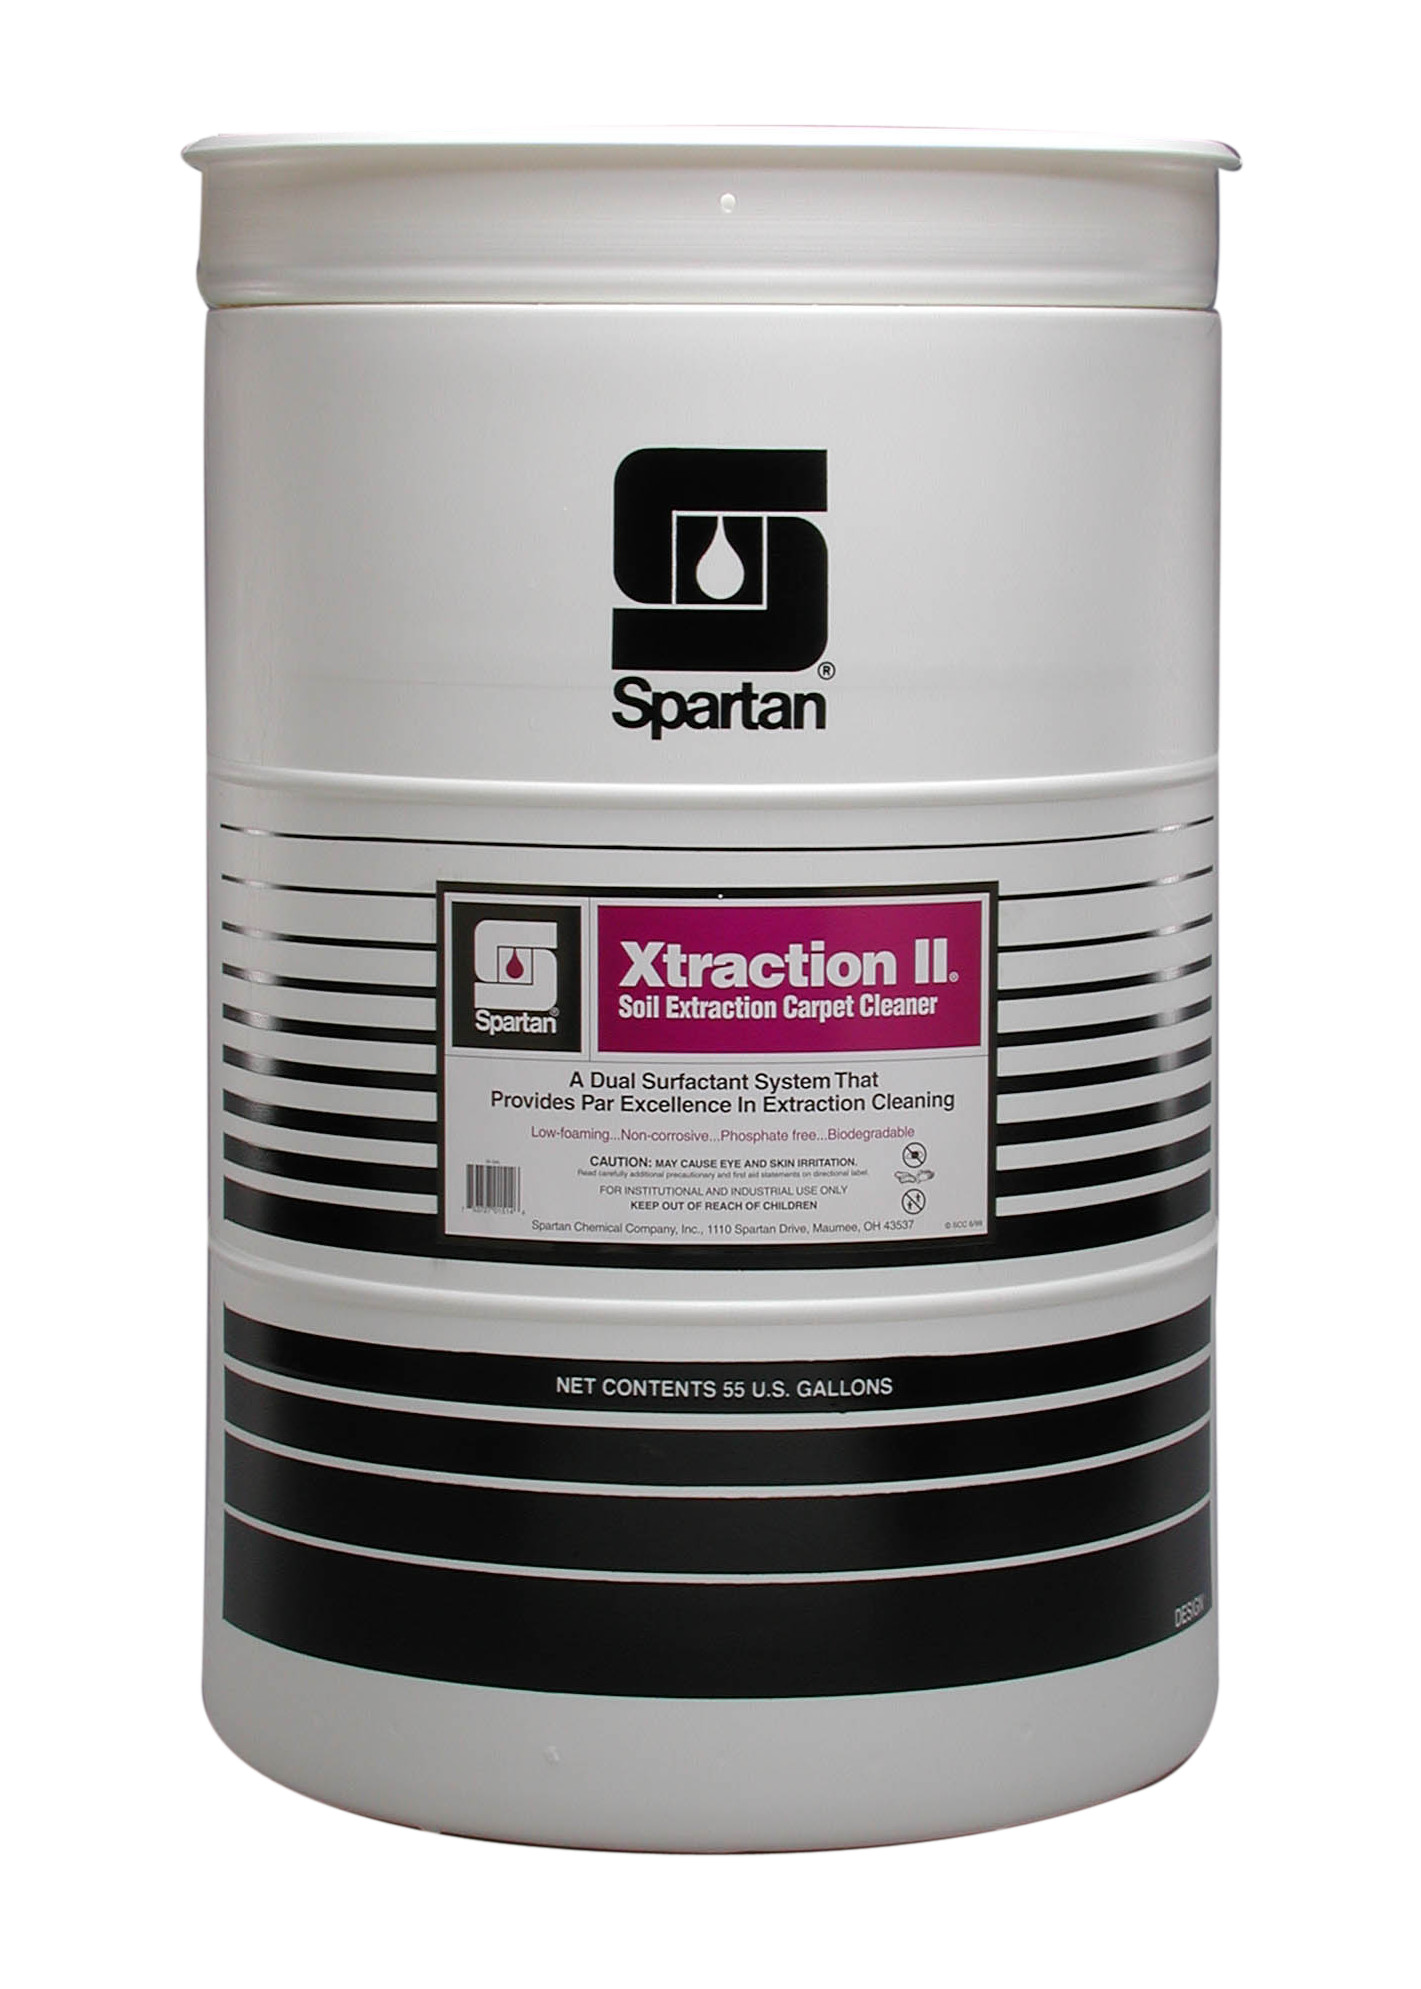 Spartan Chemical Company Xtraction II, 55 GAL DRUM